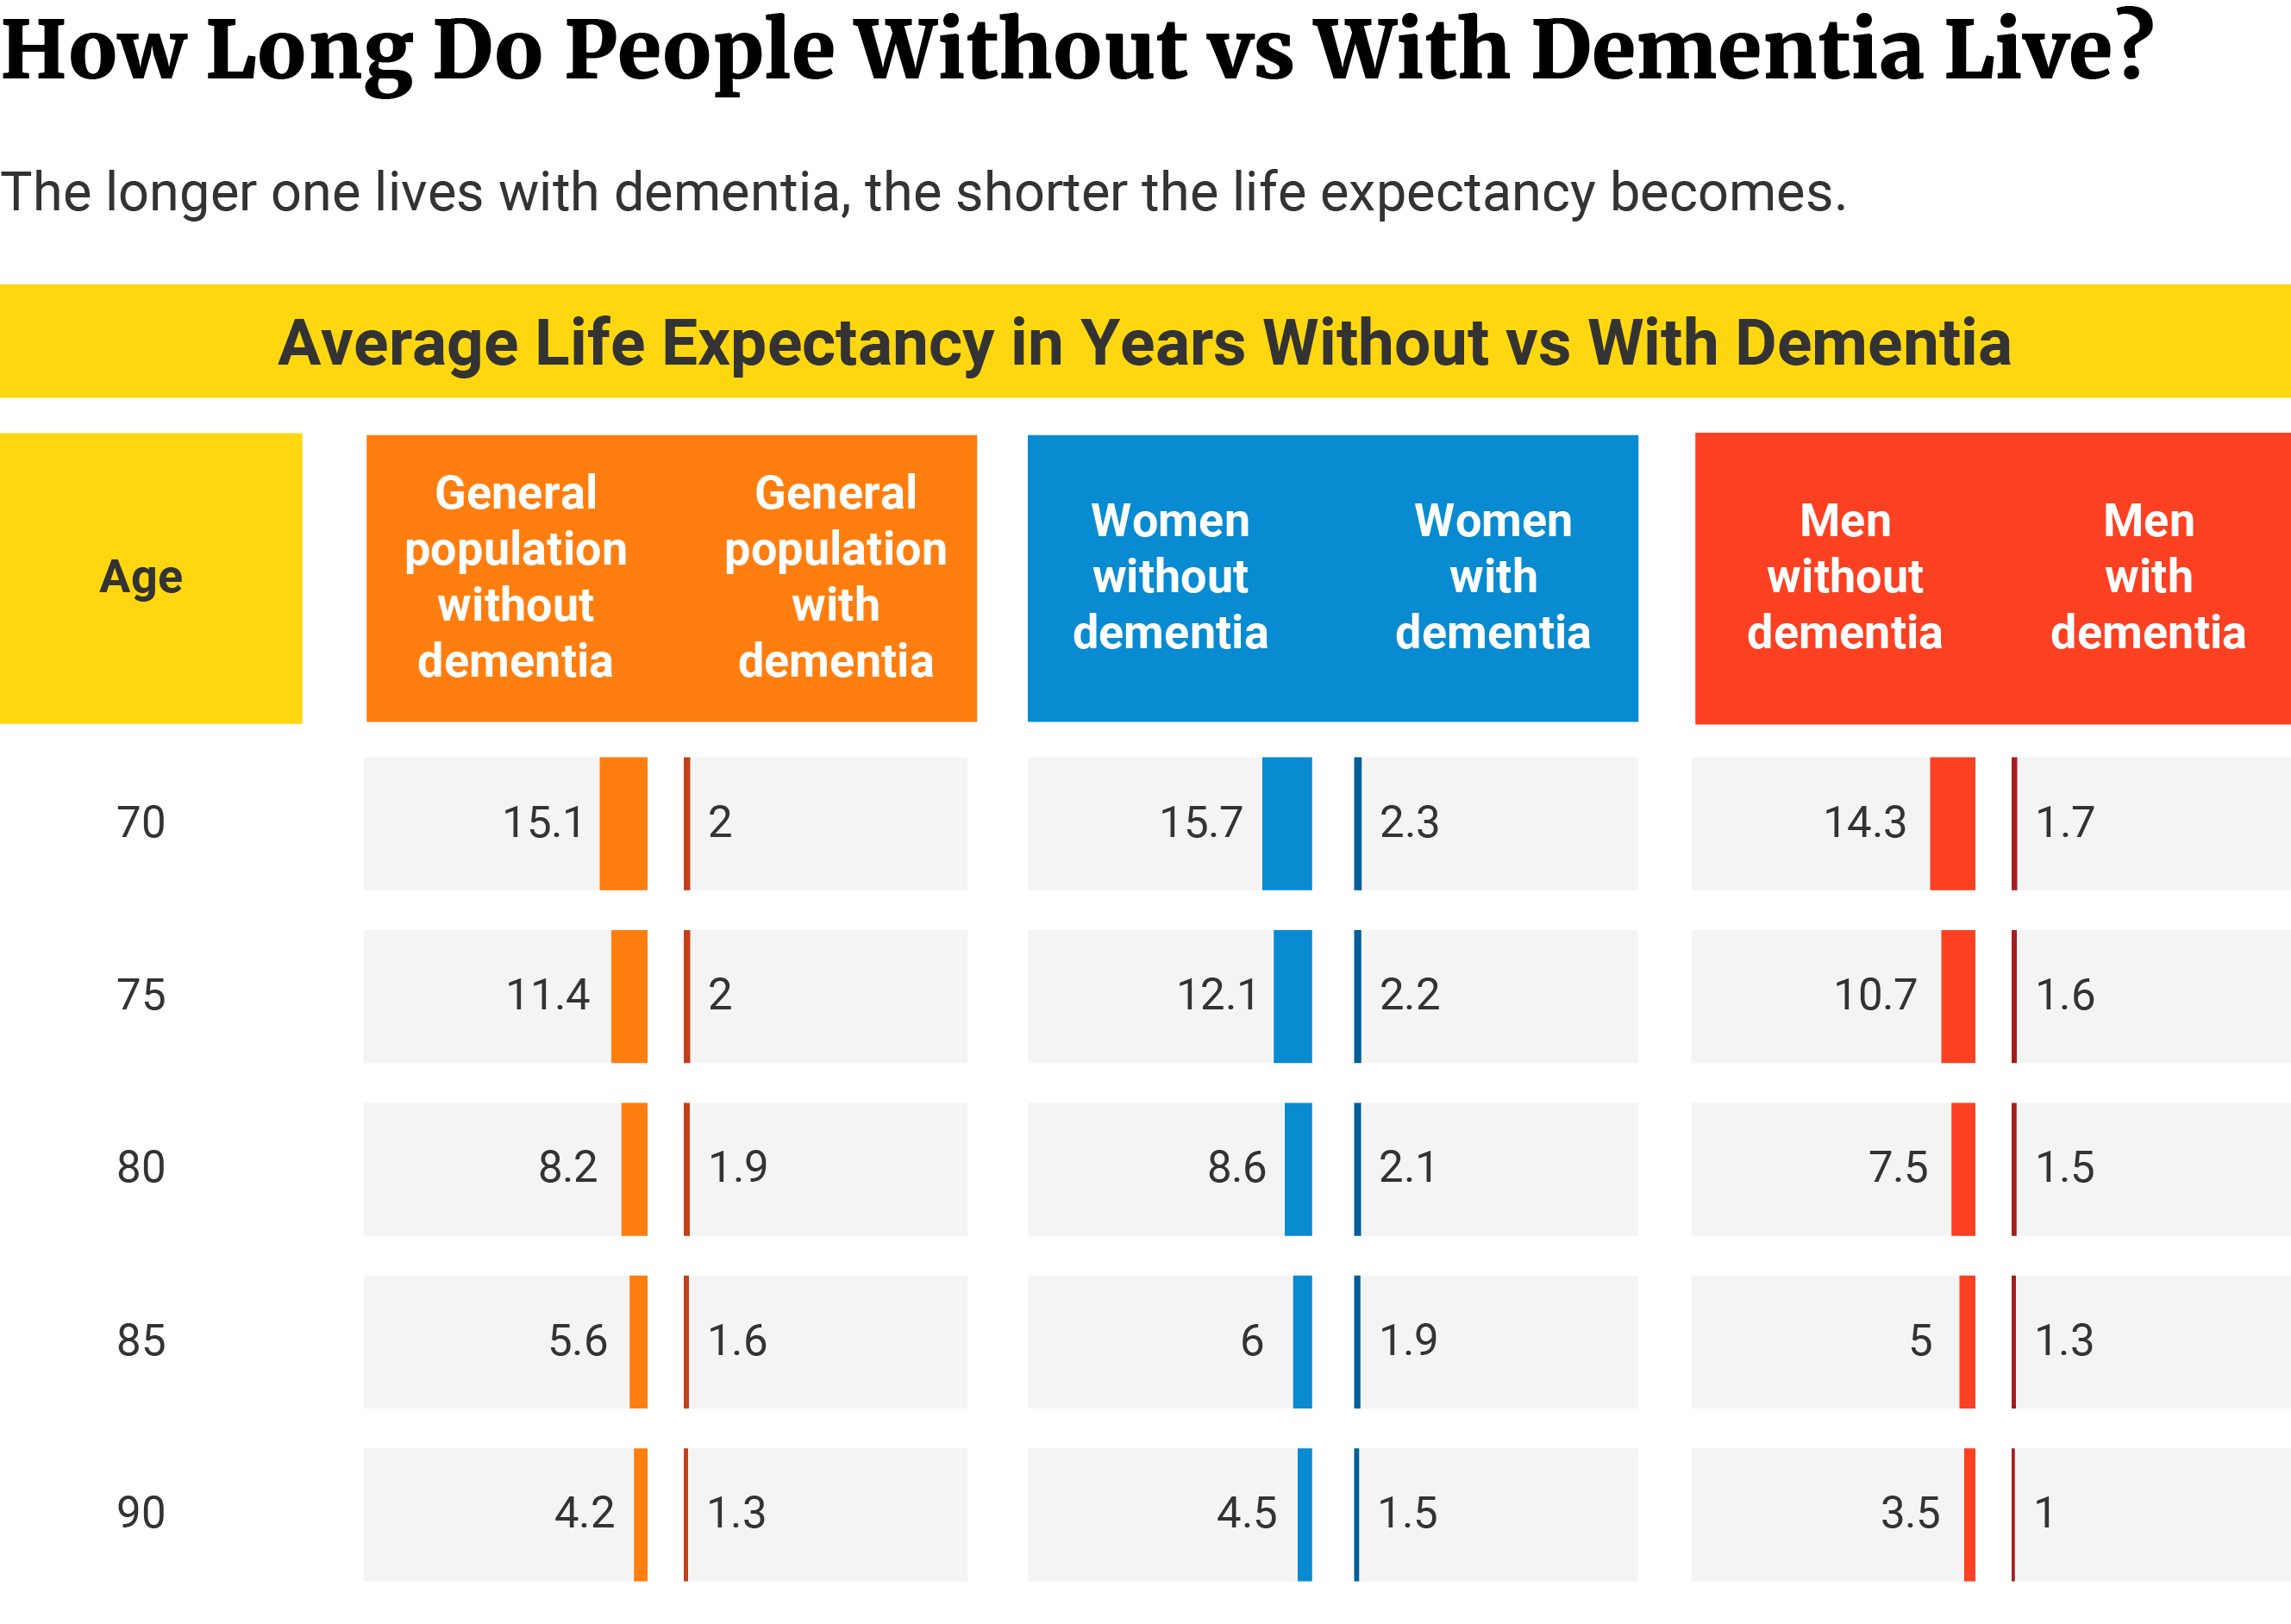 Table showing dementia reduces the average life expectancy of people living with the disease compared to those without.